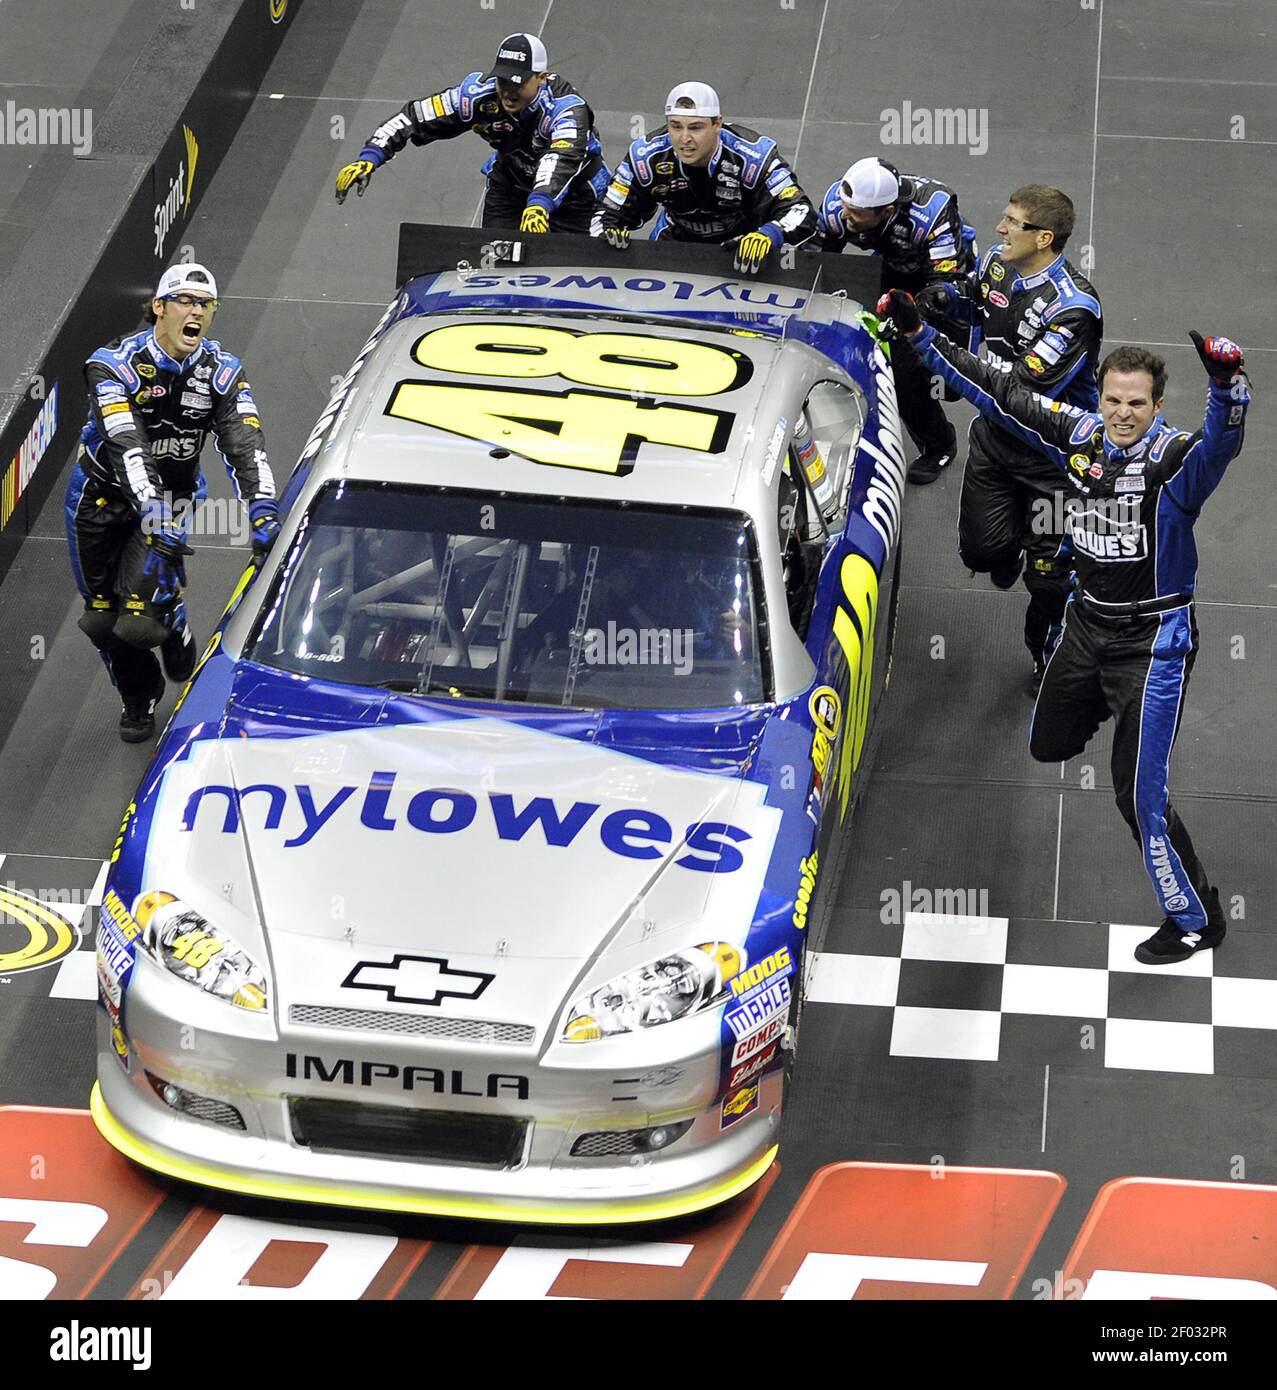 NASCAR Sprint Cup Series driver Jimmie Johnsons pit crew begin to celebrate their victory in the NASCAR Sprint Cup Series Pit Crew Challenge at Time Warner Cable Arena in Charlotte, North Carolina